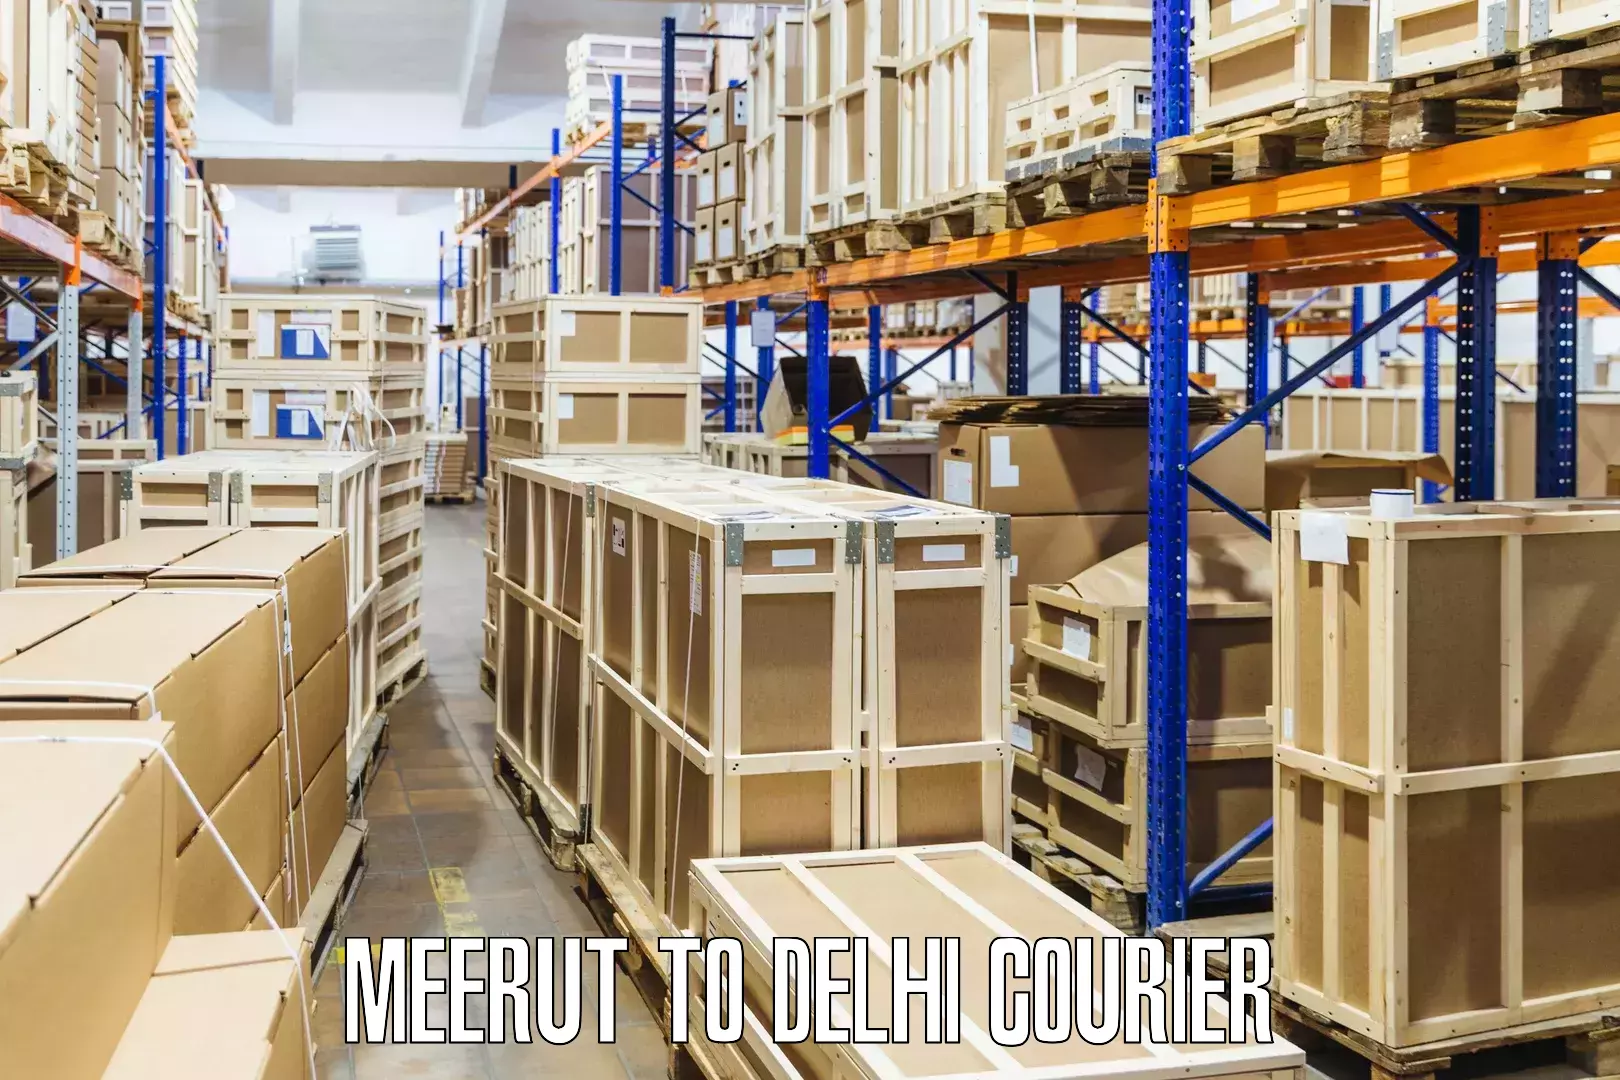 Multi-city courier Meerut to Lodhi Road